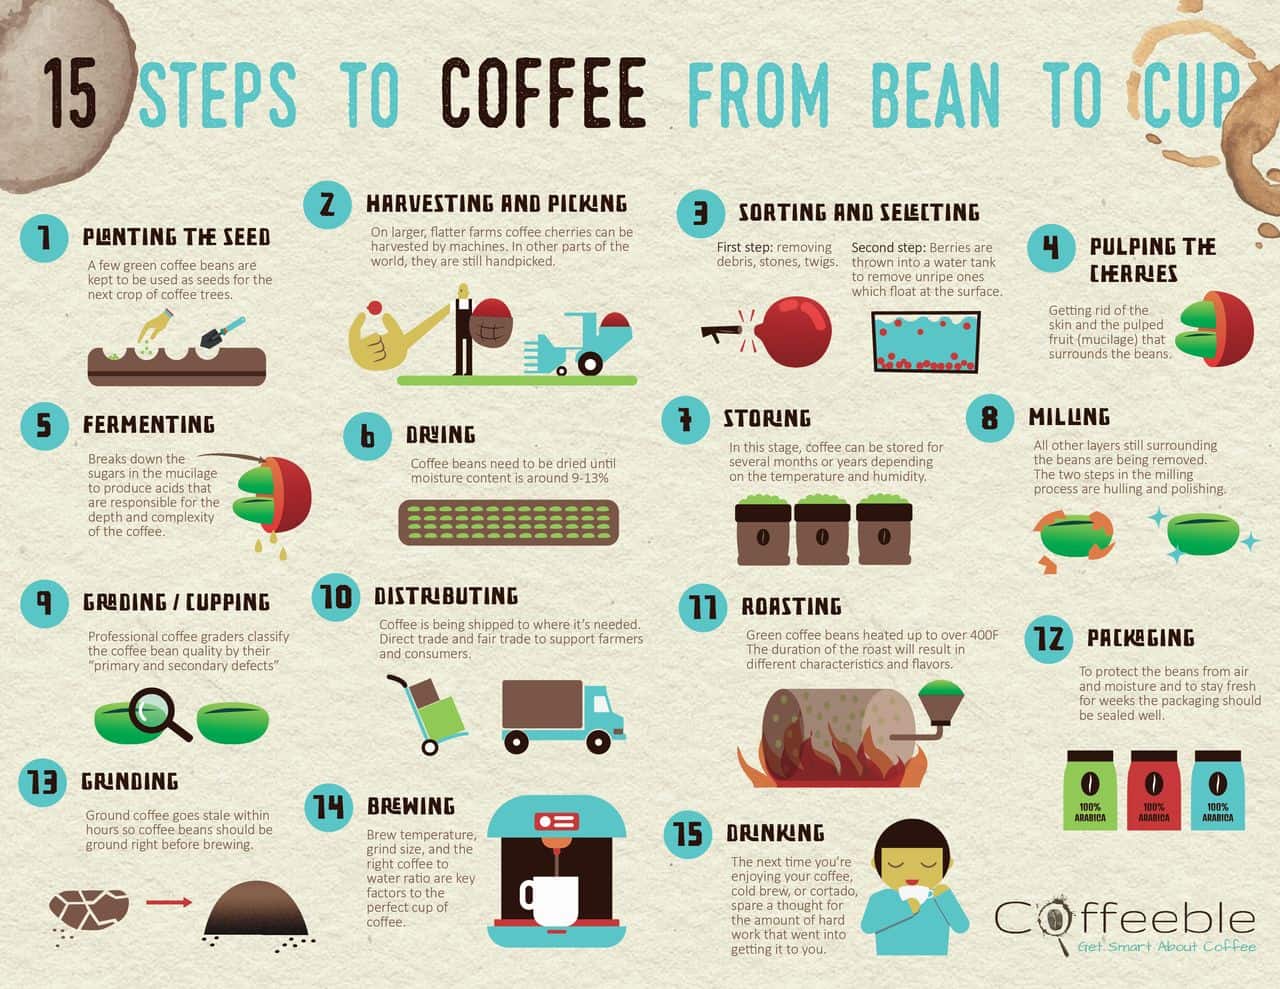 https://www.coffeeble.com/wp-content/uploads/2017/04/15-steps-to-coffee-from-seed-to-cup-infographic-large.jpg